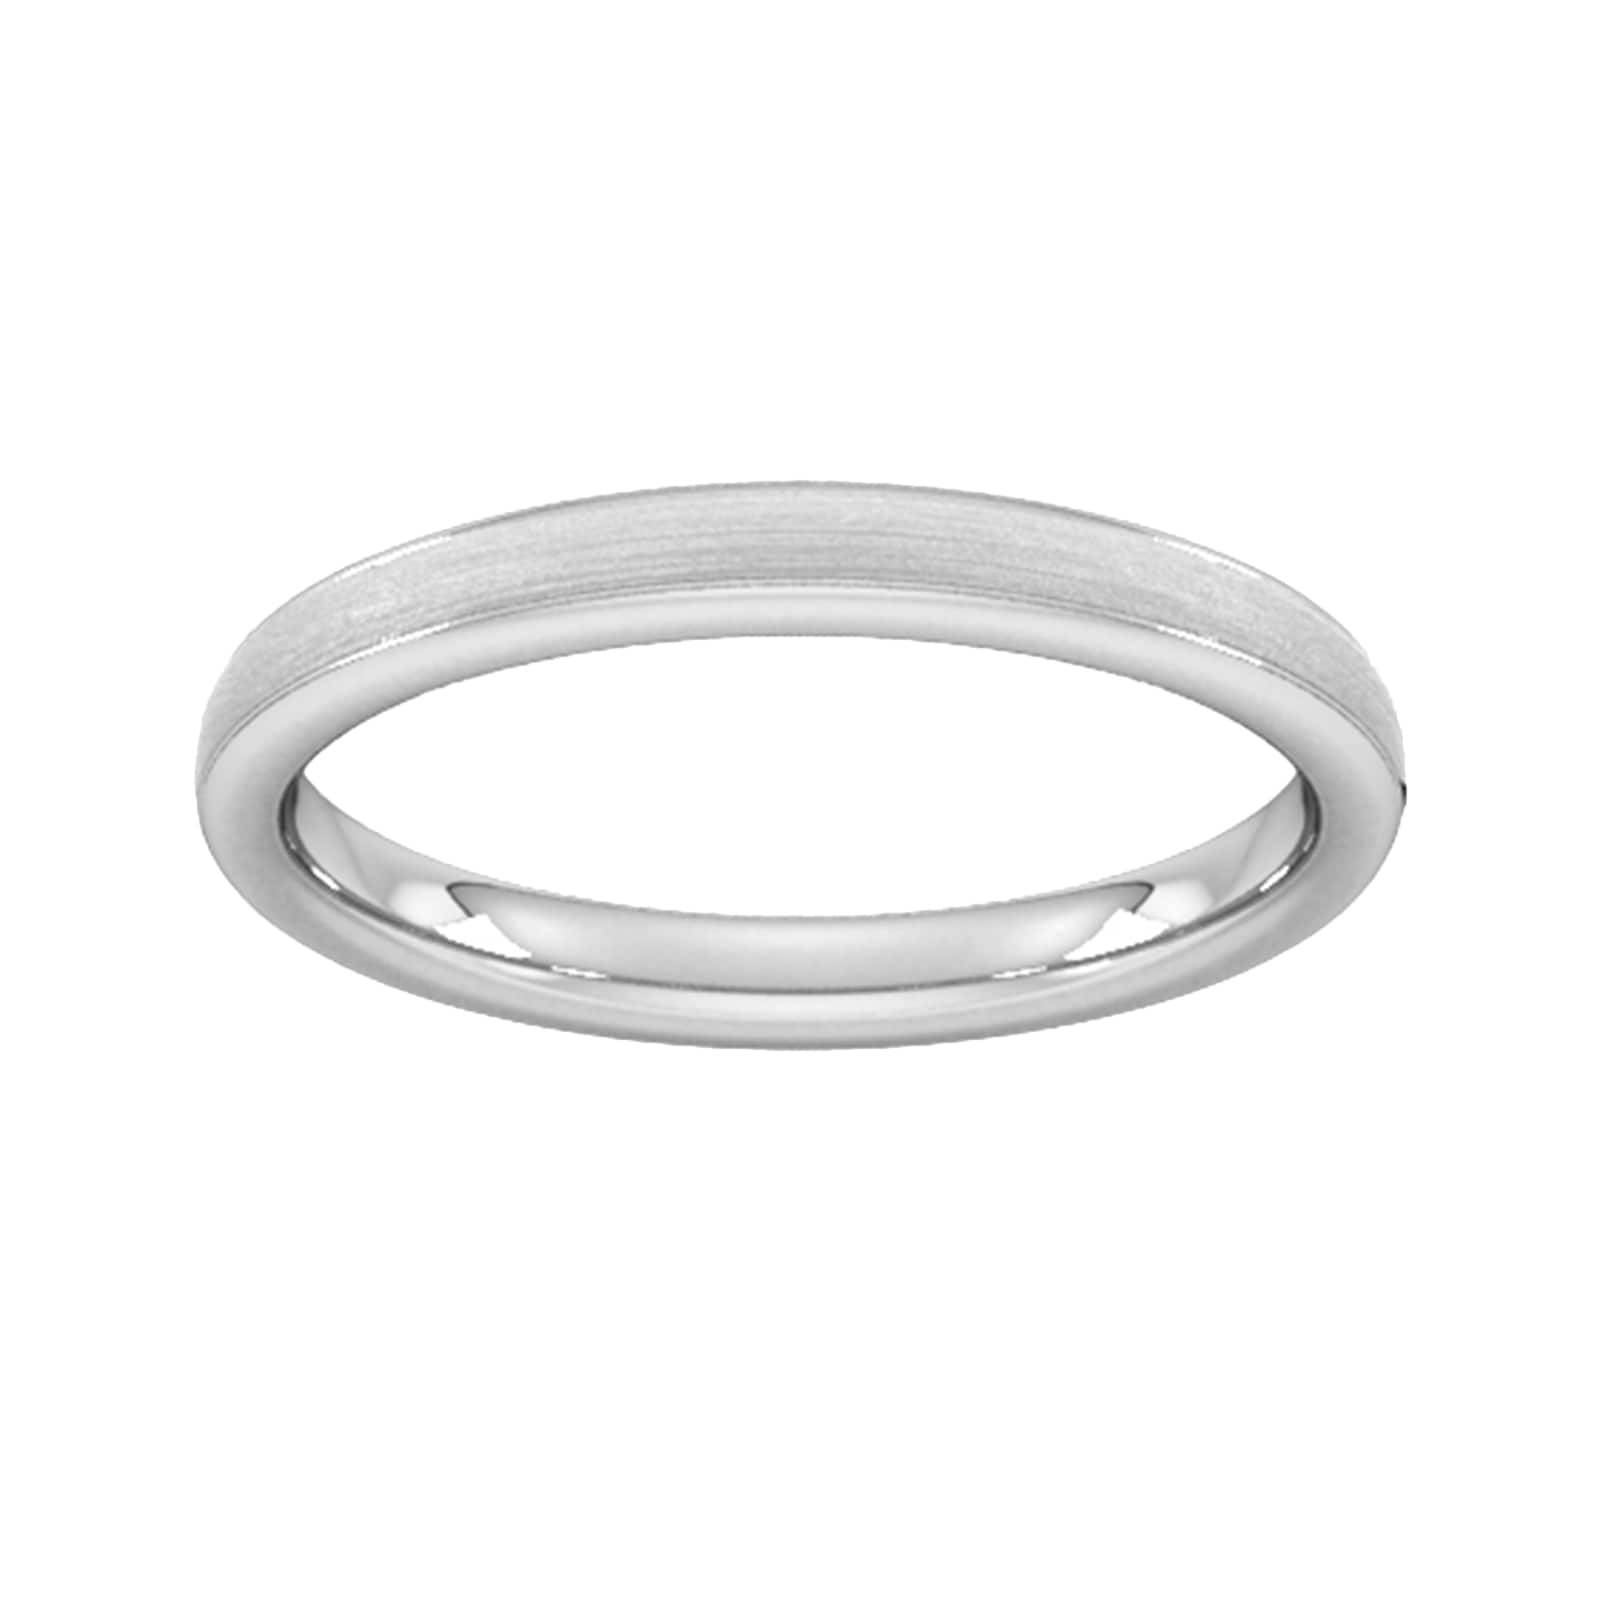 2.5mm D Shape Heavy Matt Centre With Grooves Wedding Ring In Platinum - Ring Size M